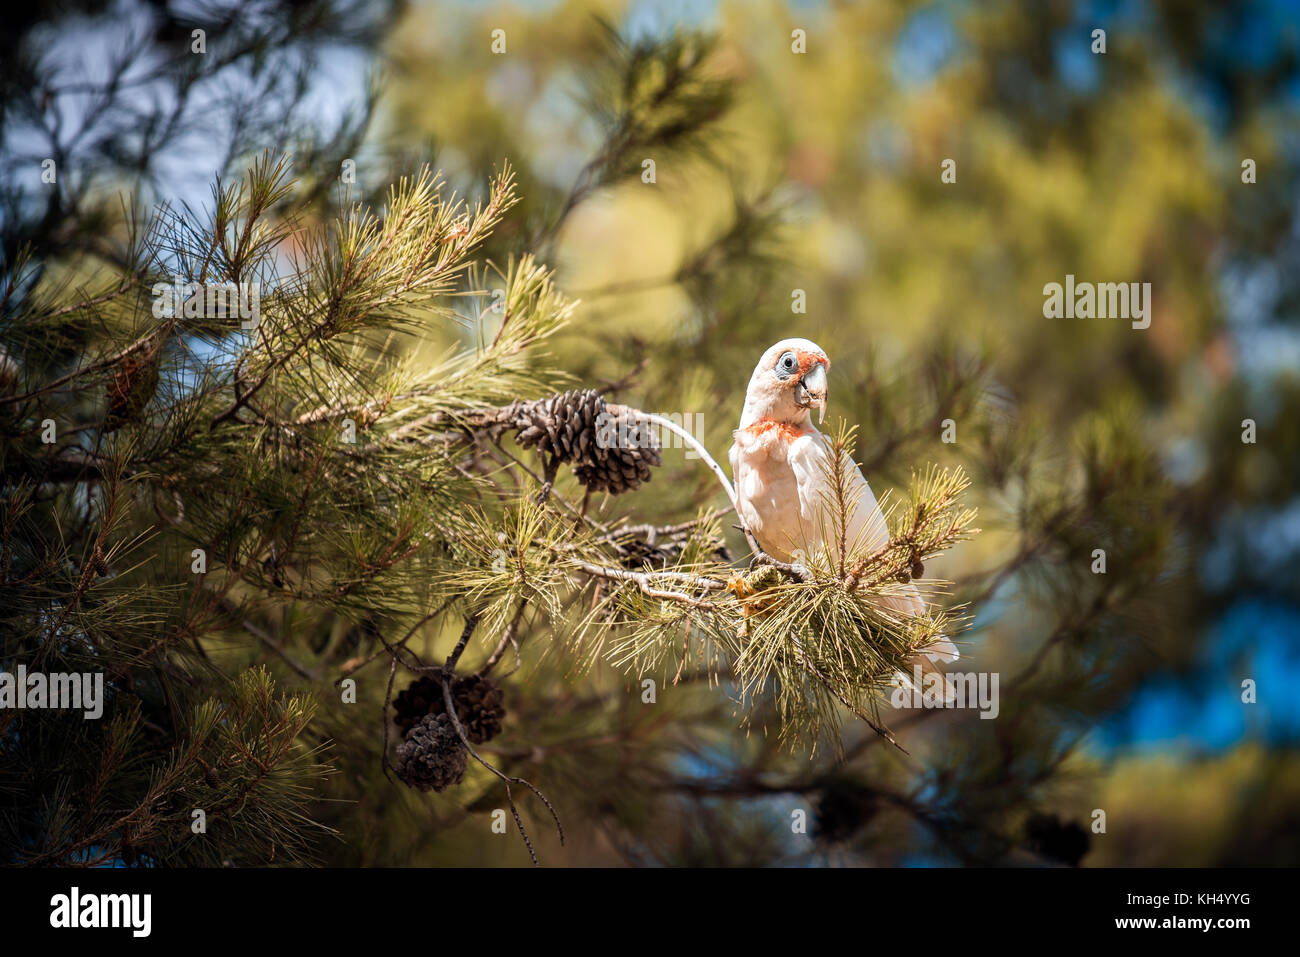 Australian white cockatoo sitting on tree and eating fir-cone Stock Photo